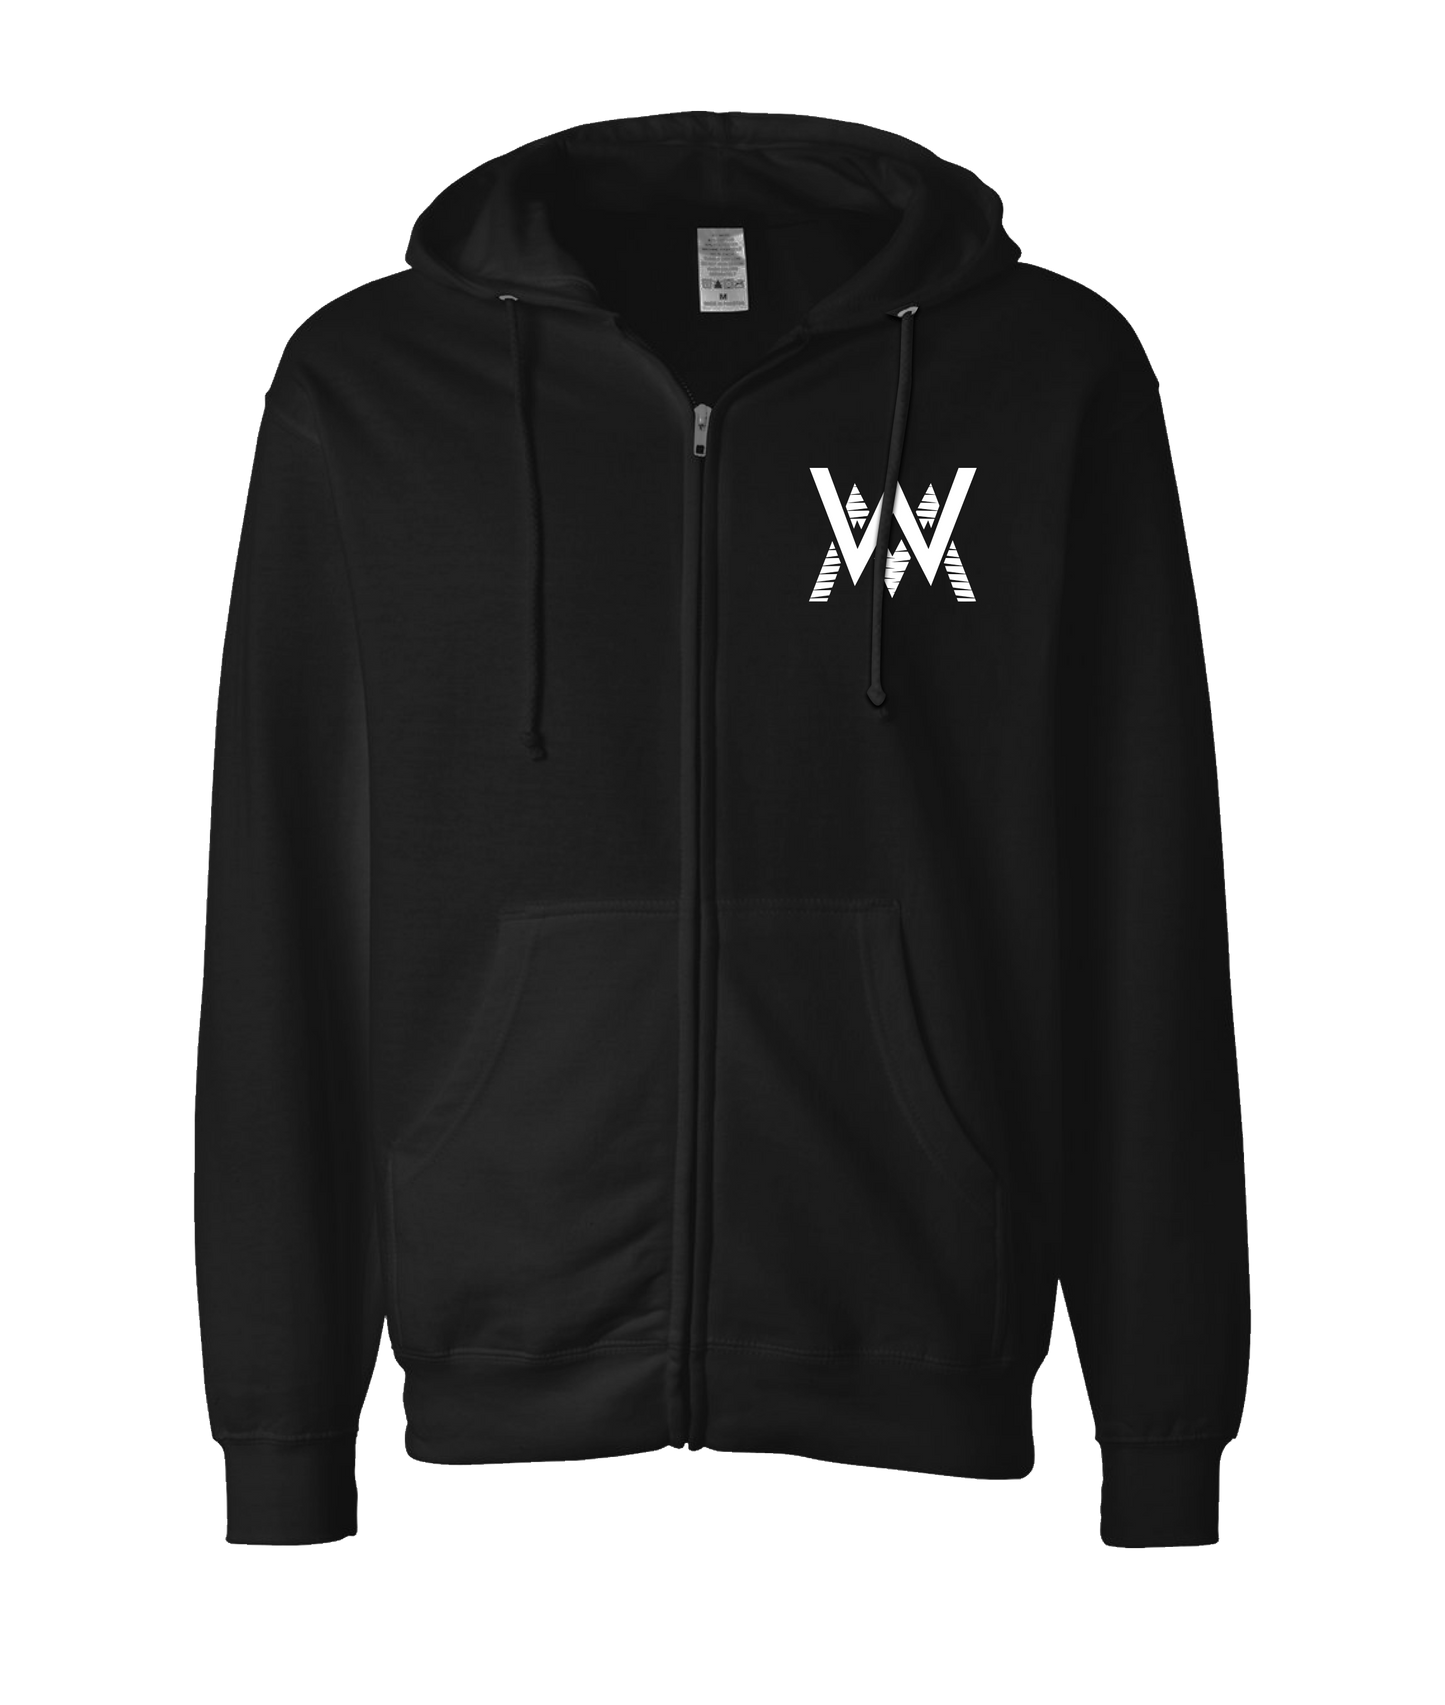 Will Matic - Letters - Black Zip Up Hoodie